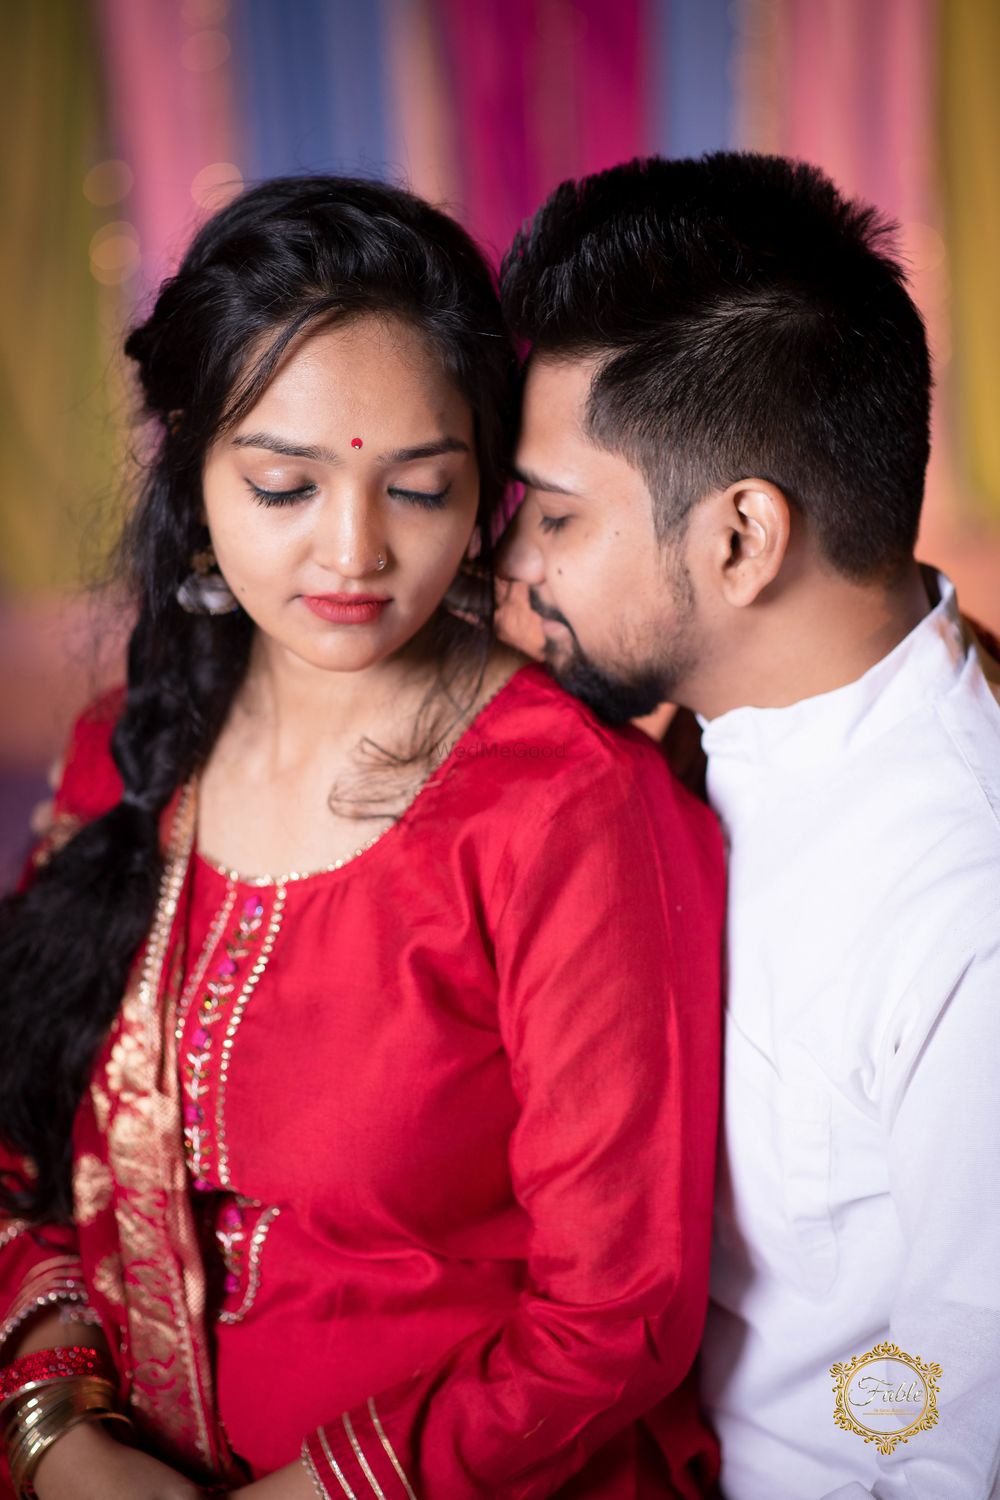 Photo From Couple Portrait - By Fable by Karan Bhirani